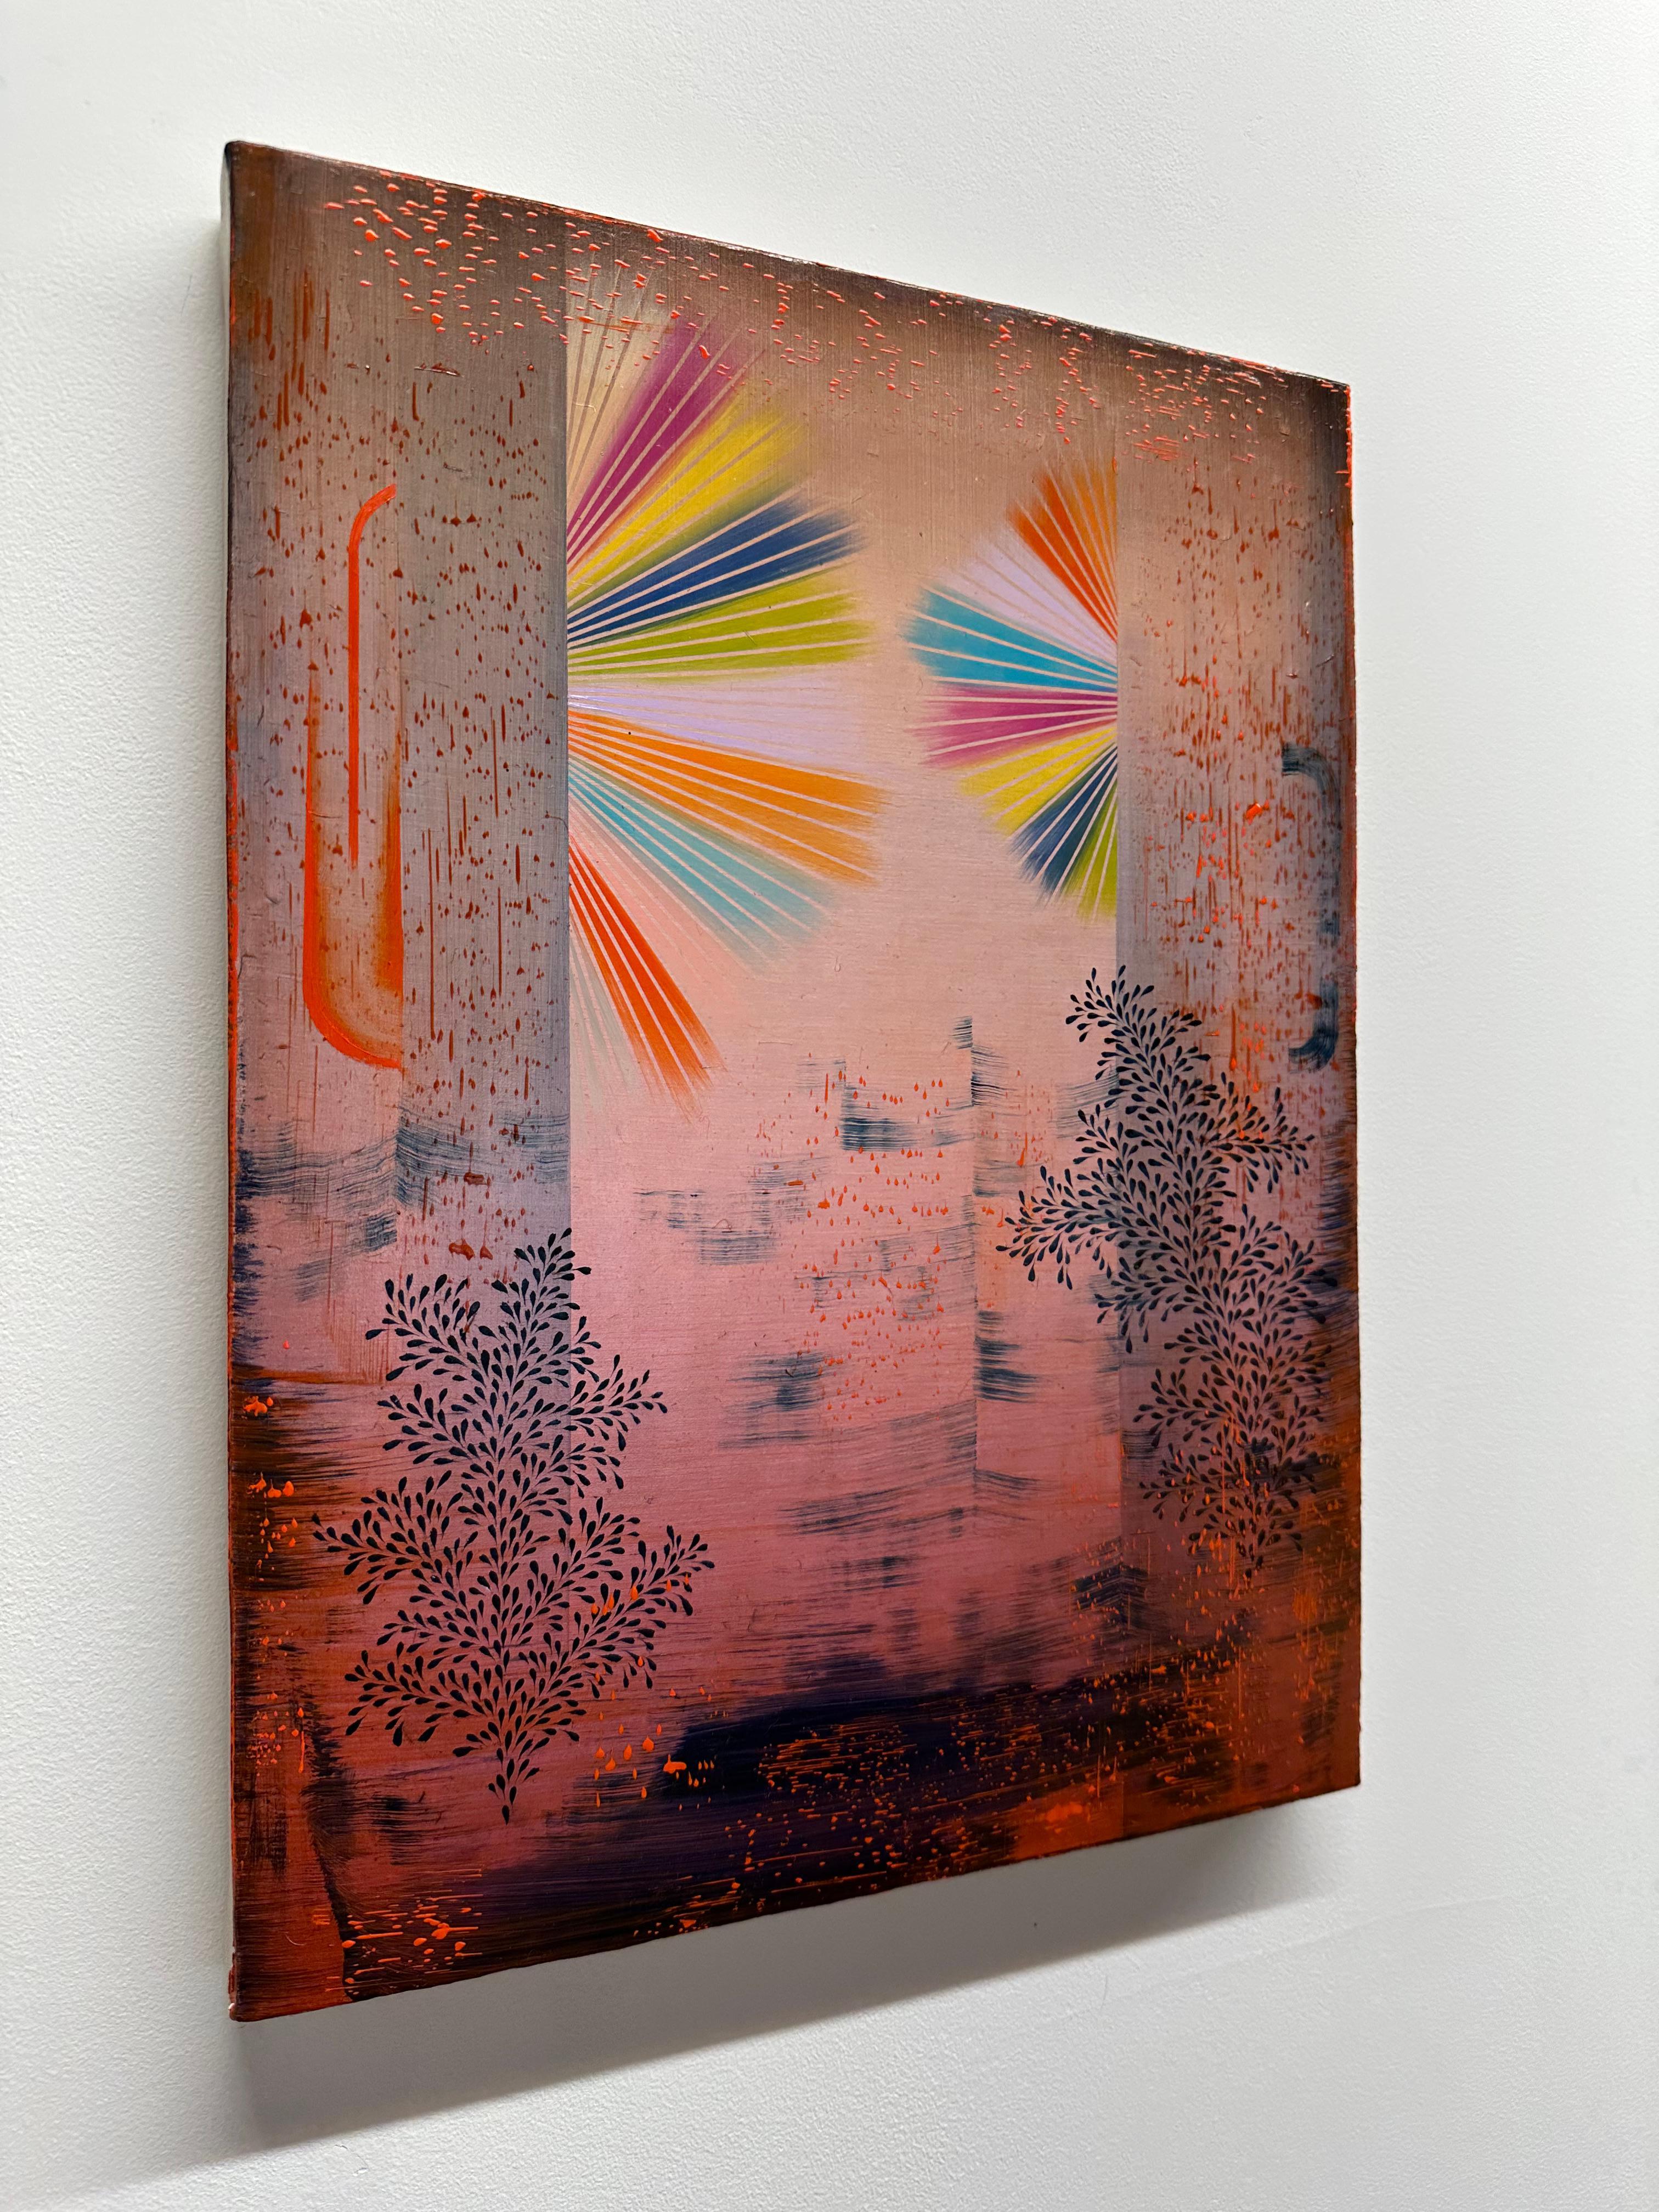 Firecracker, Pale Rose Pink, Light Red, Yellow, Orange, Blue Abstract Patterns - Contemporary Painting by Gabe Brown